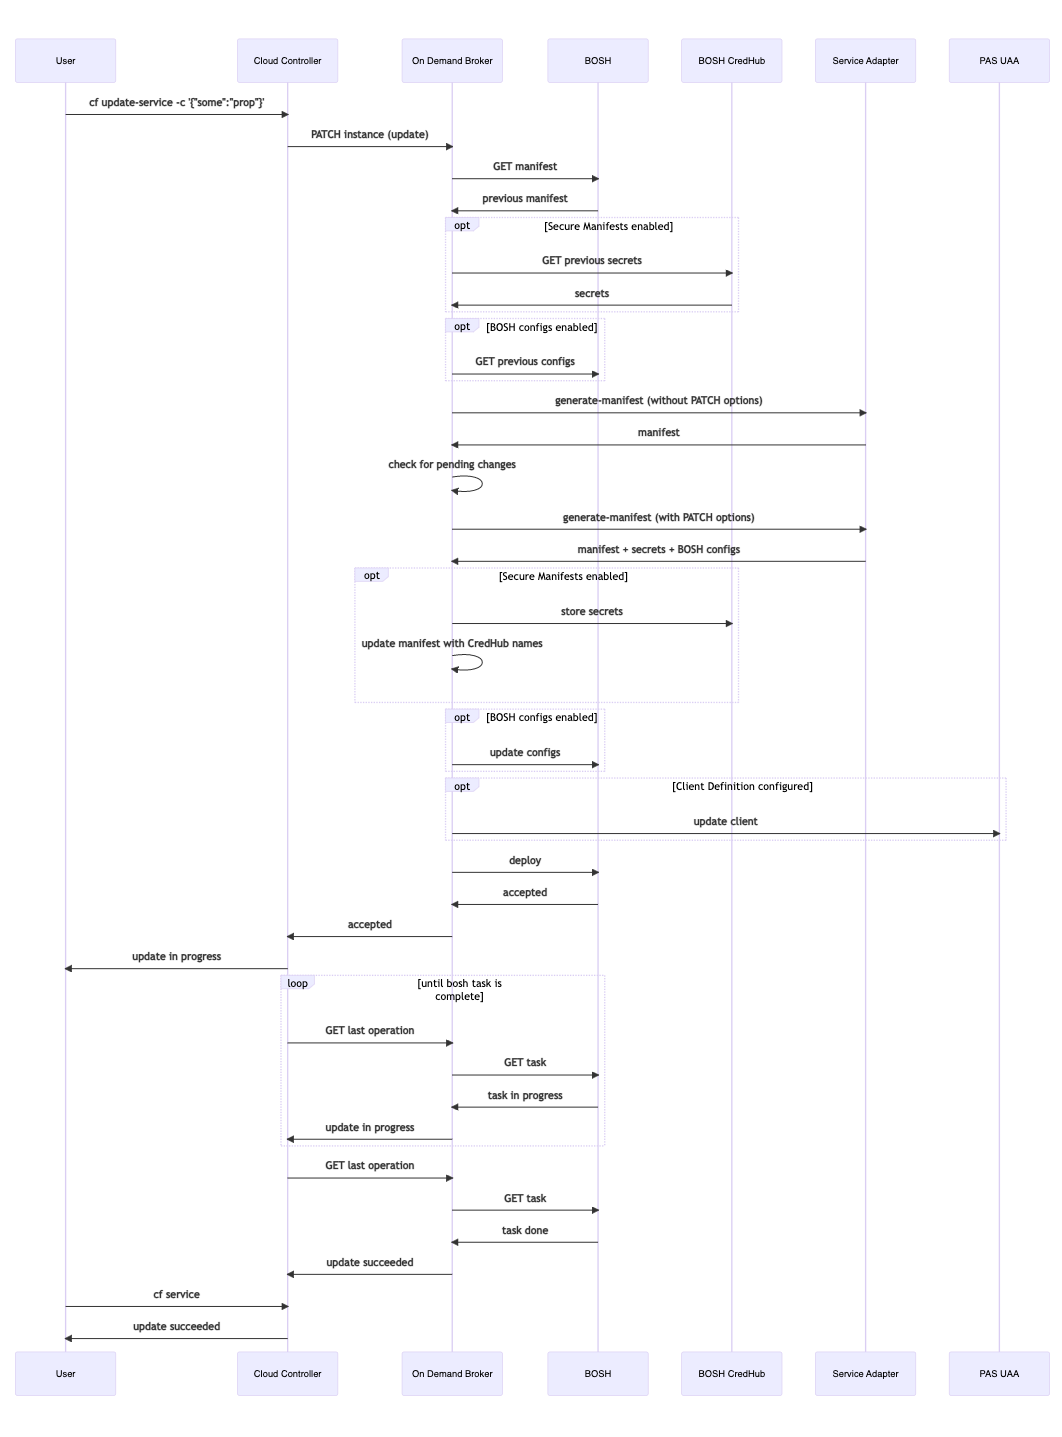 Workflow diagram for creating a service instance if there are no pending changes.